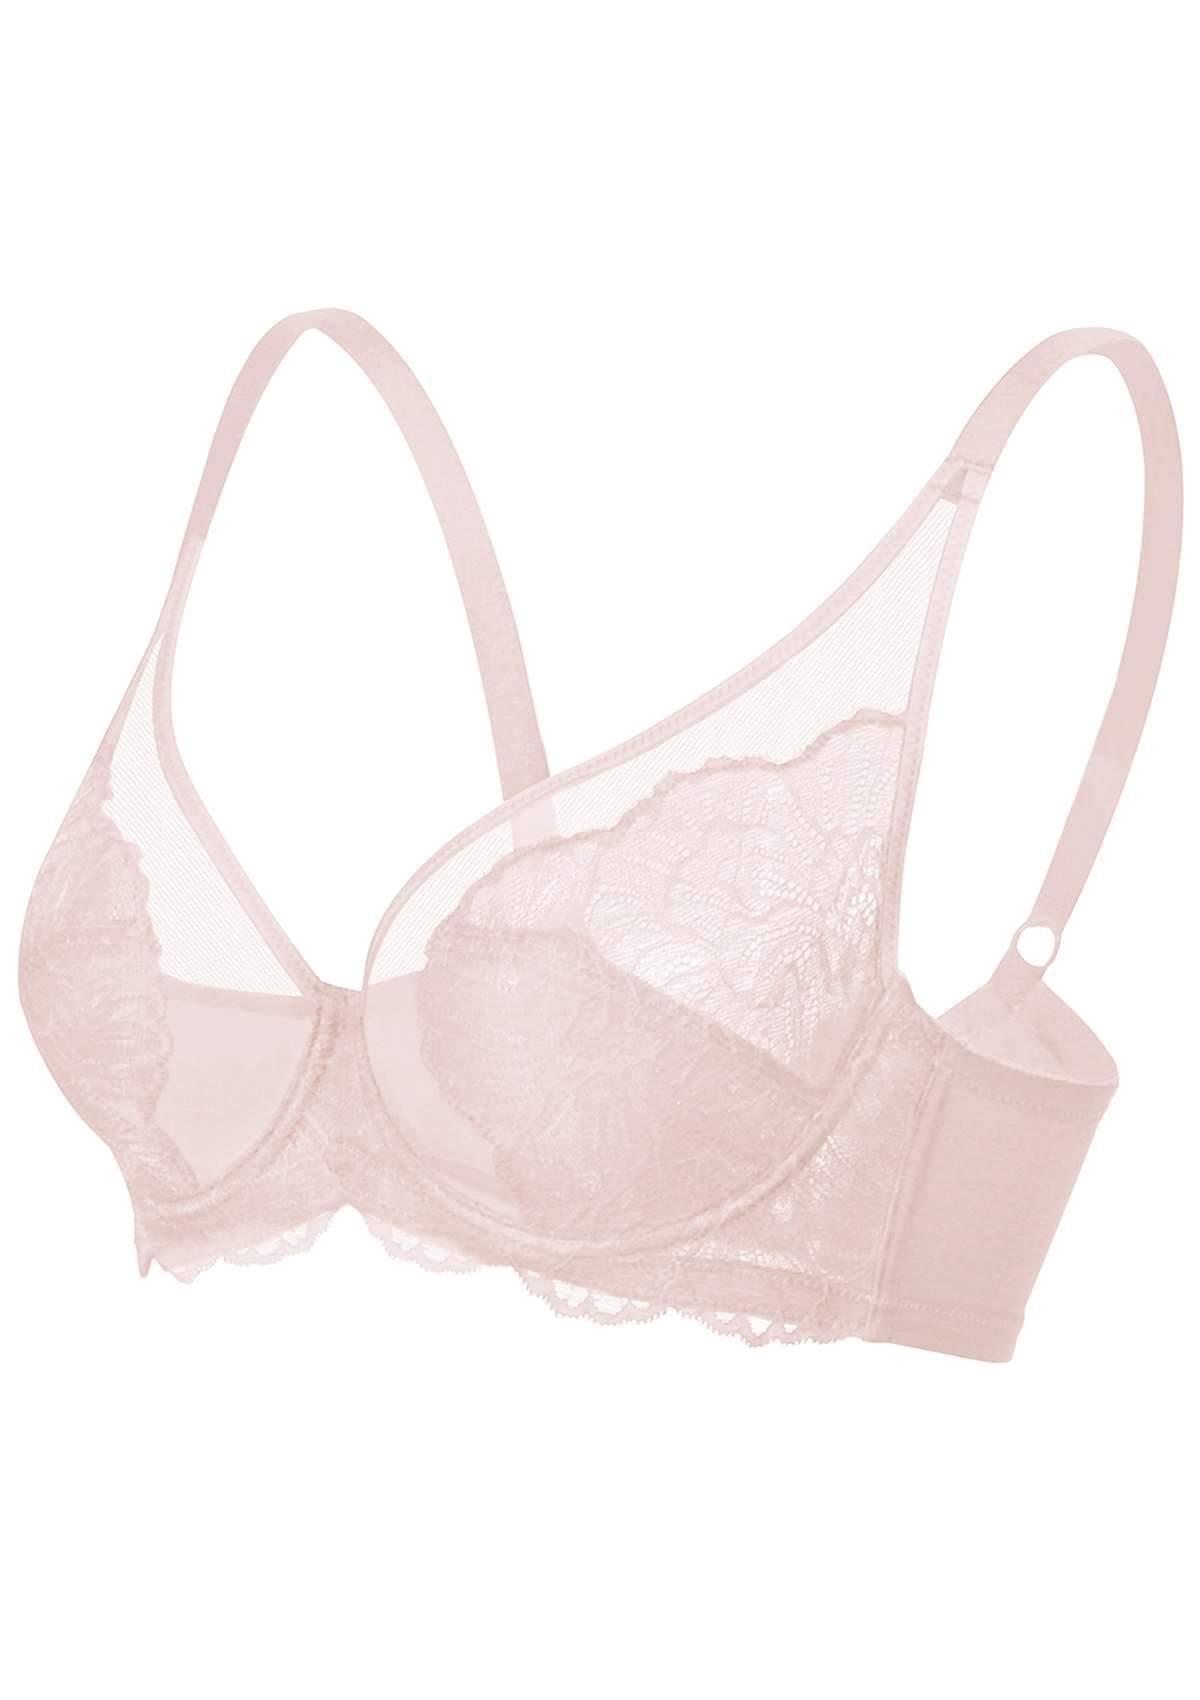 HSIA Blossom Lace Bra And Panties Set: Best Bra For Large Busts - Dark Pink / 40 / H